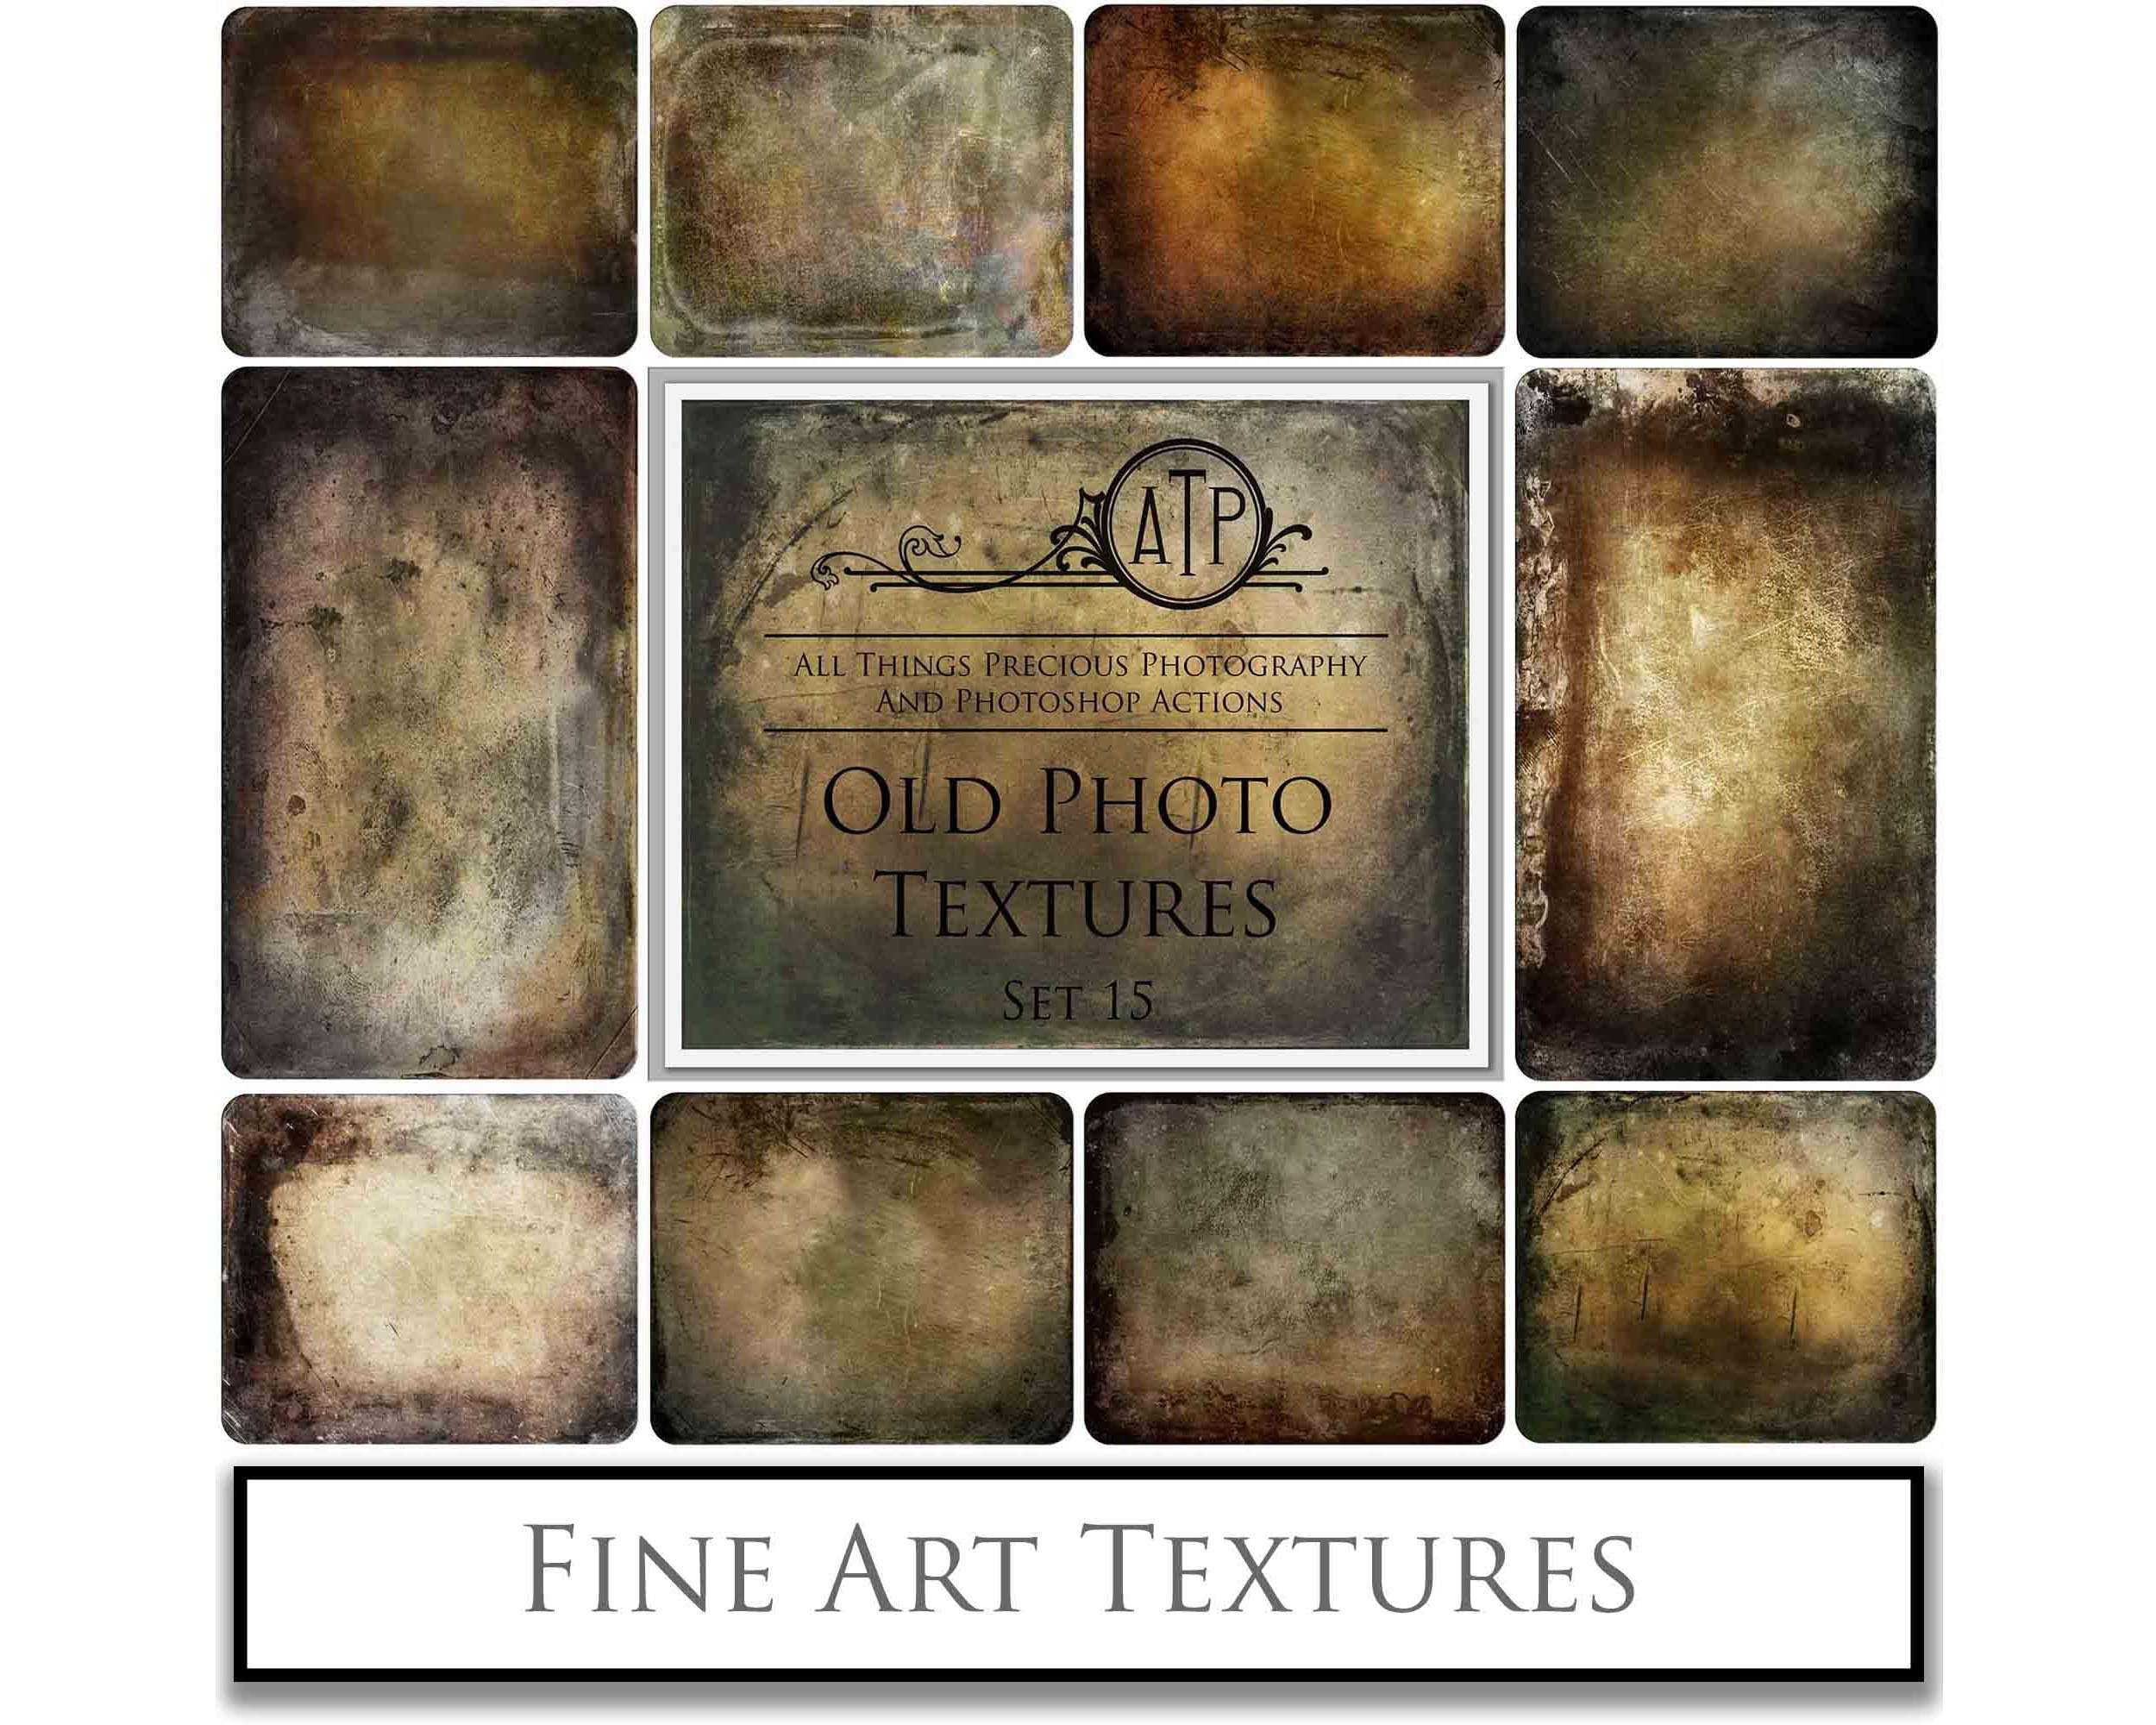 Old Photo Textures Frame. Tintype  Digital Backdrop. Fine art texture for photographers. Photo Overlays. Antique, Old World, Grunge, Abstract wall decor bundle. Textured Background. Printable backdrop, Print Bundle. High resolution, 300dpi Graphic Assets for photography, scrapbooking, design. By ATP Textures